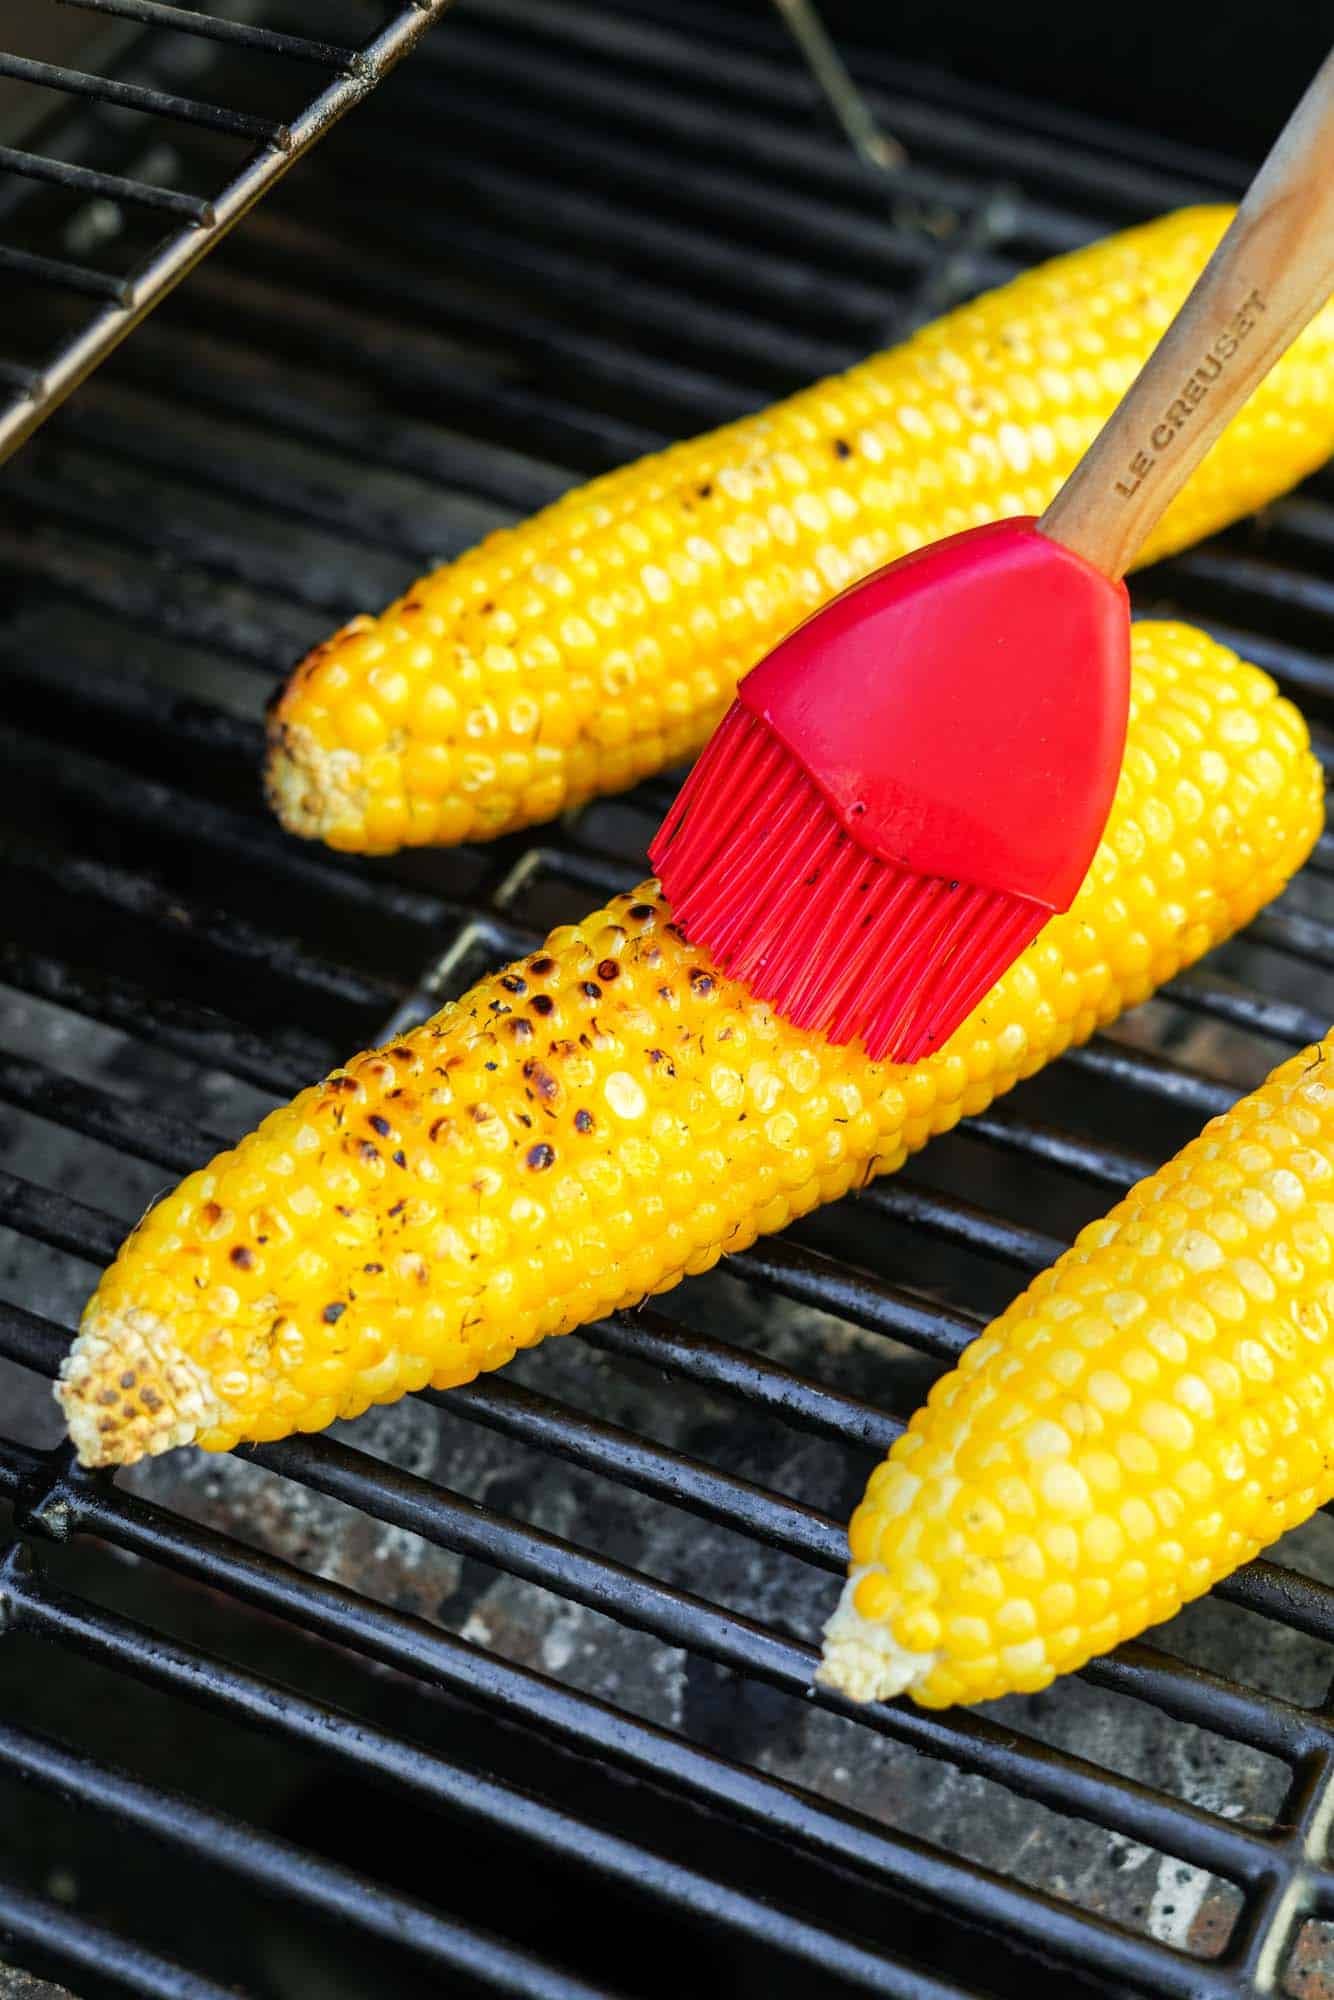 husked corn on an outdoor grill. A red silicone brush is adding butter.